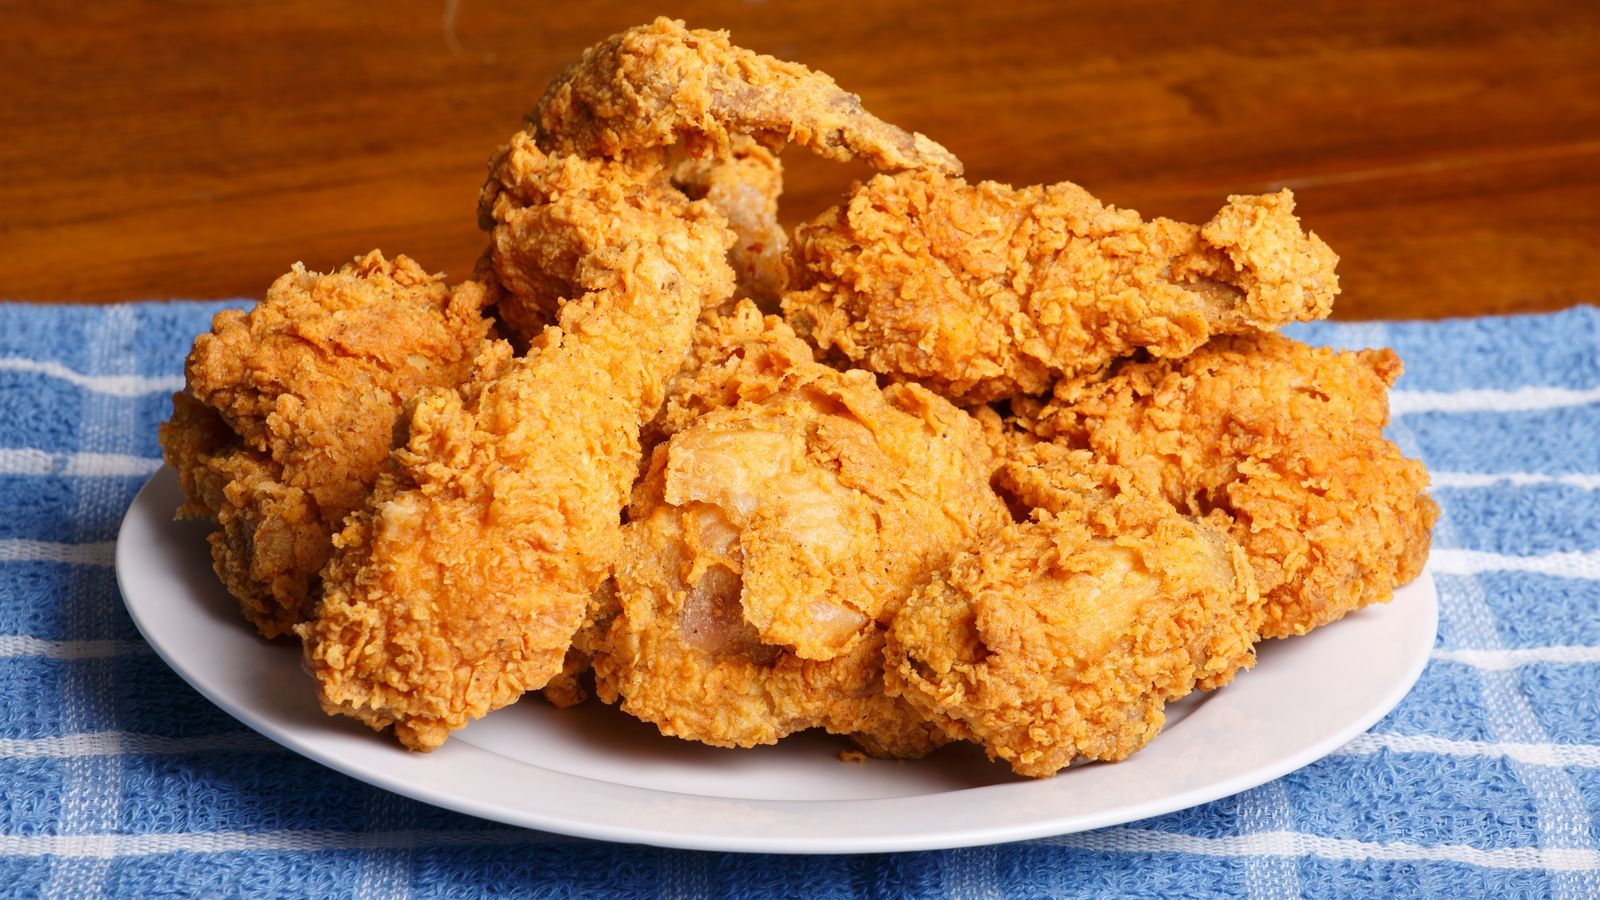 Where to Eat Fried Chicken in Atlanta